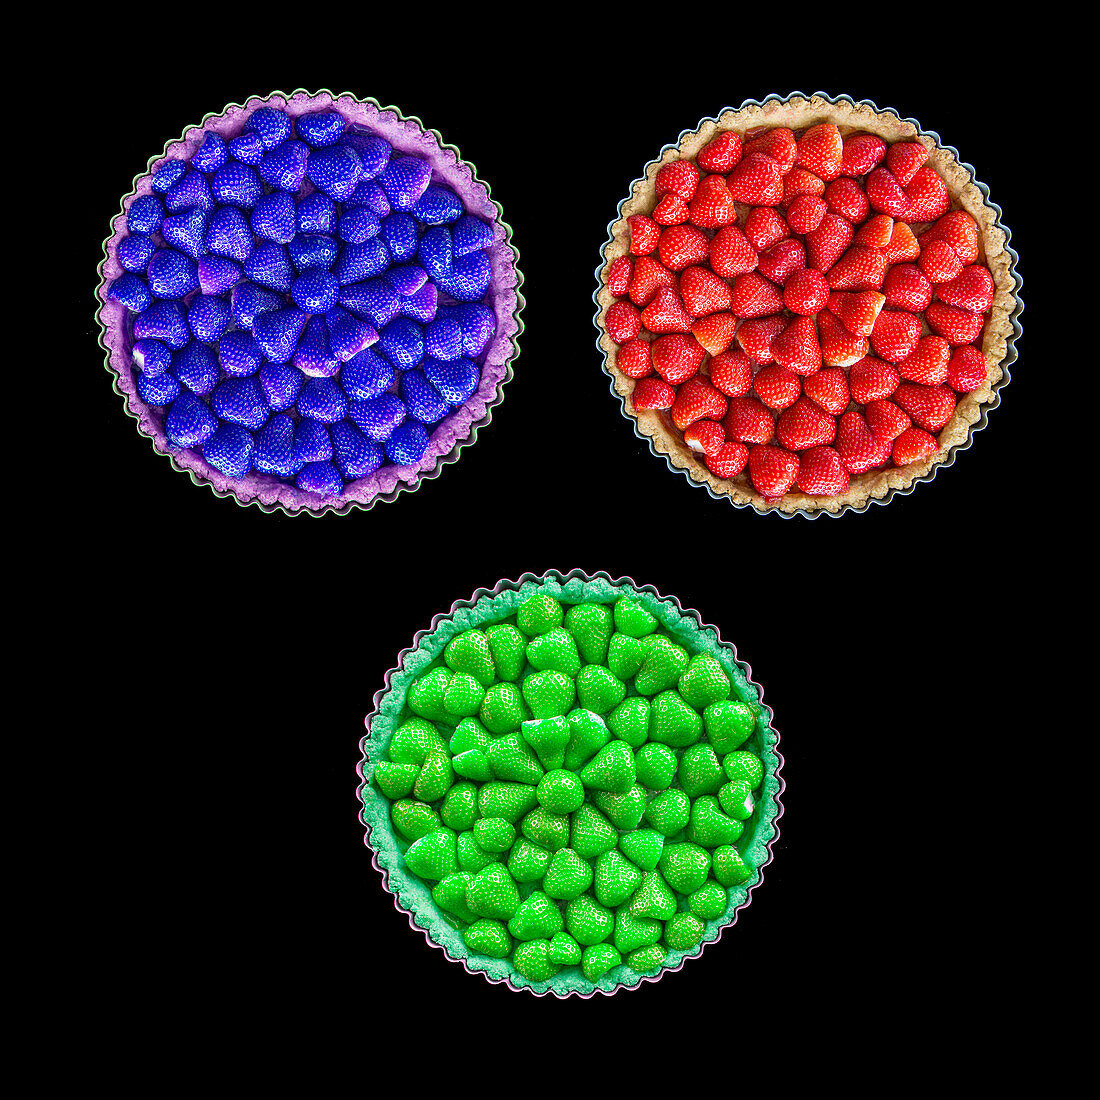 Colorful strawberry pies